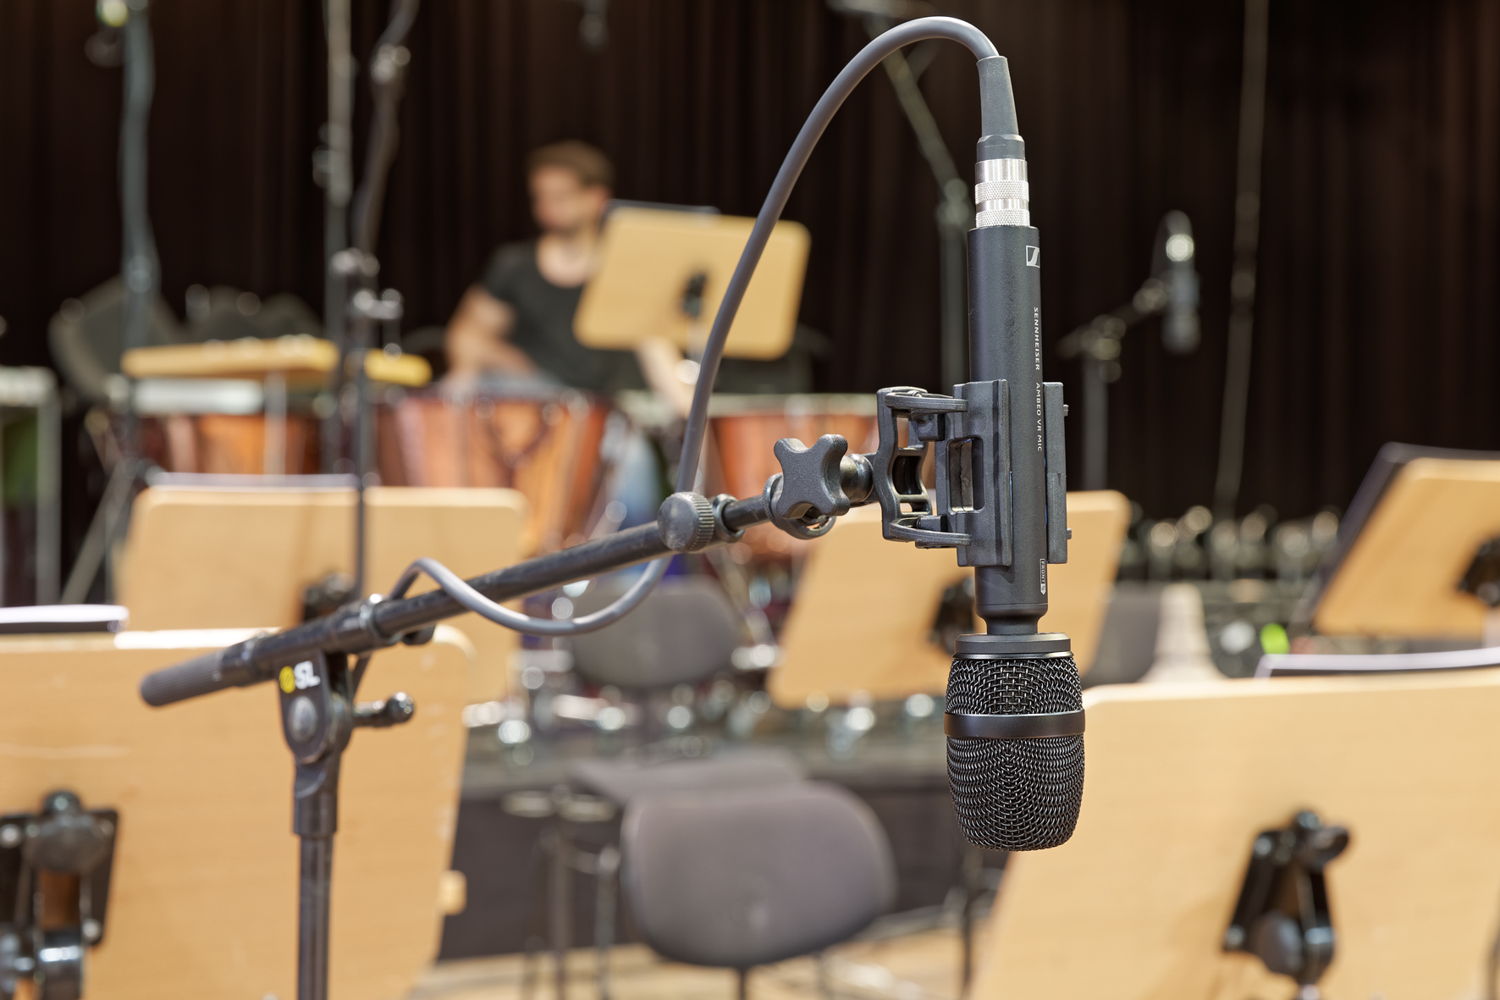 Six AMBEO VR Mics were placed between the orchestra’s musicians to capture the harmonious interplay from different perspectives